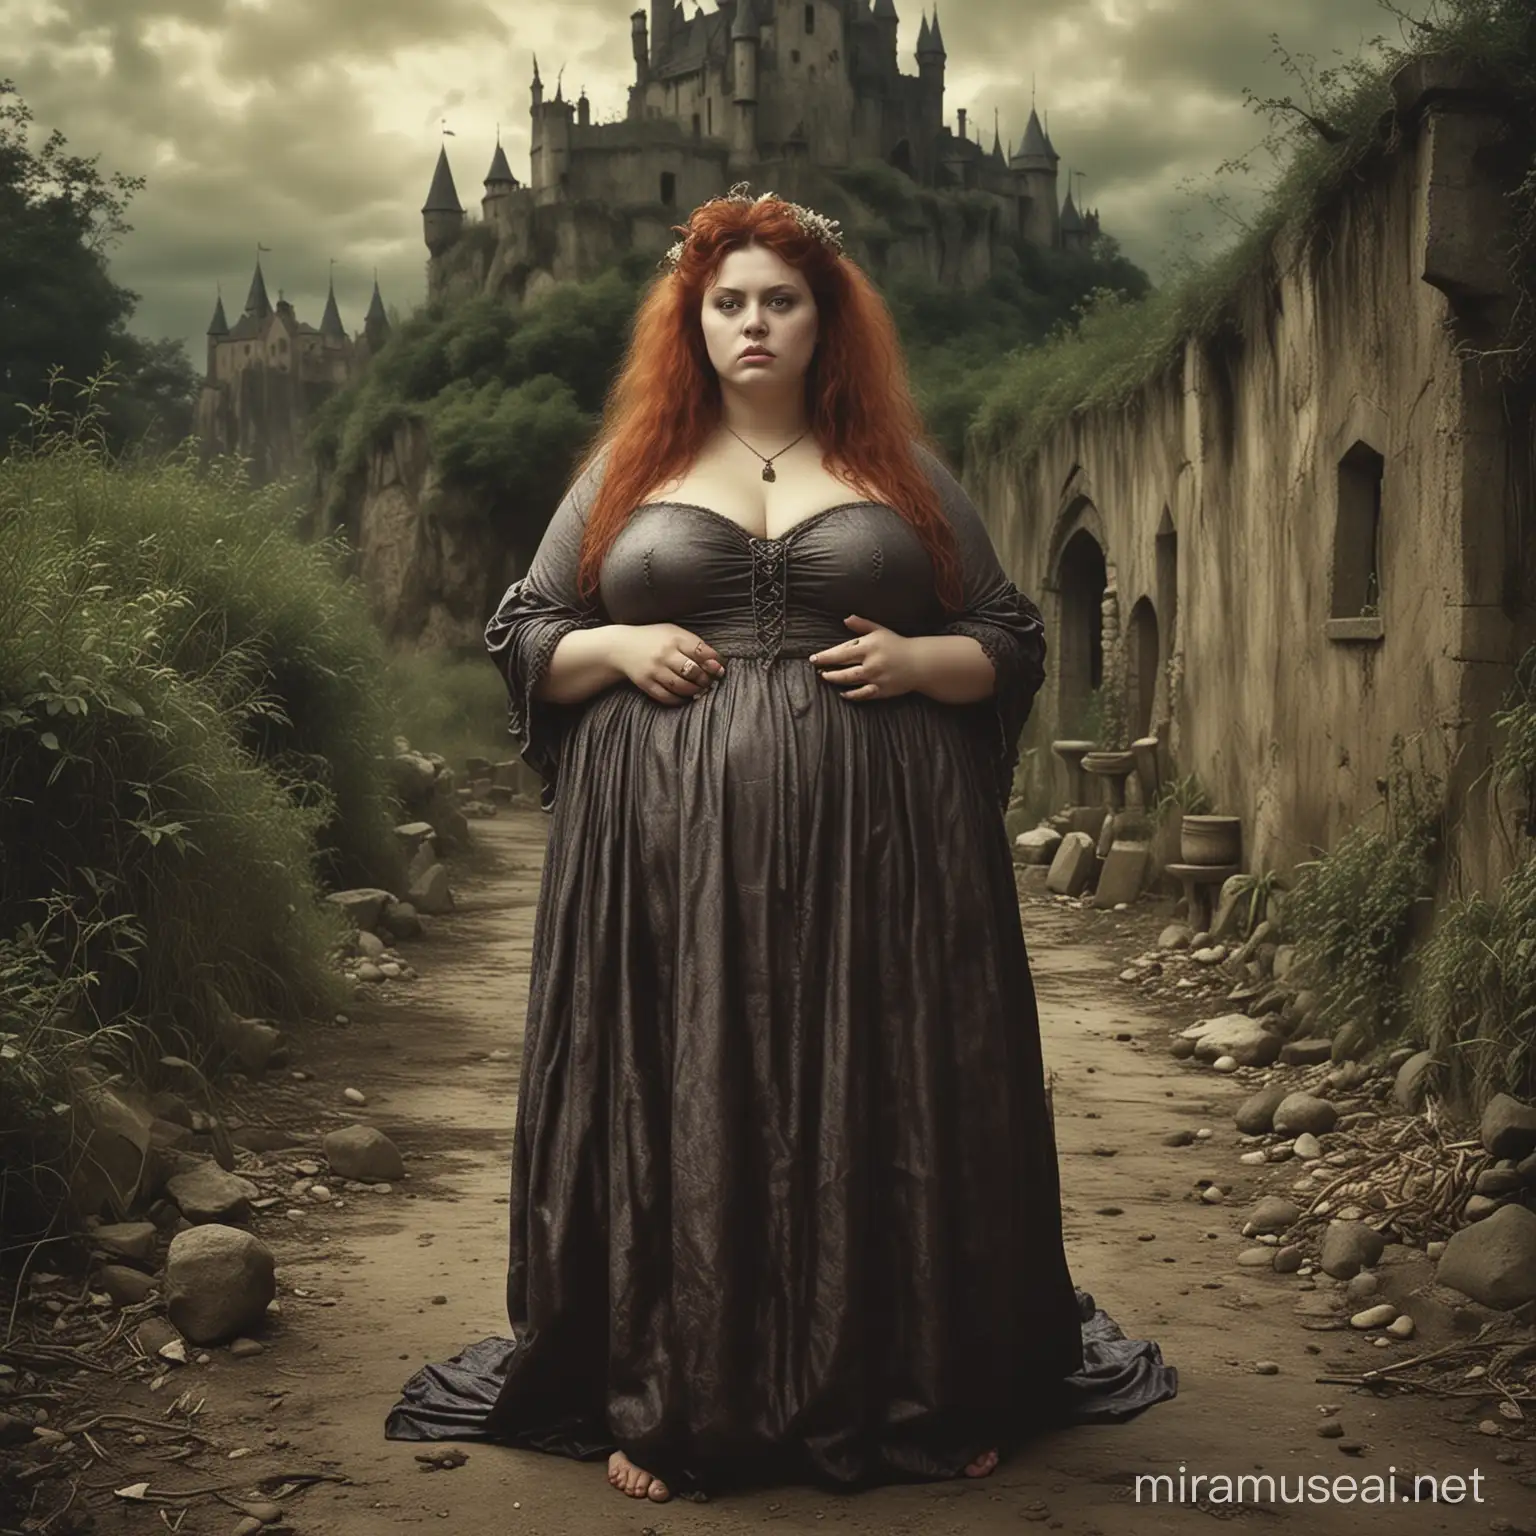 Liberal Female Character in Tim Burton Style with Medieval Pagan Setting